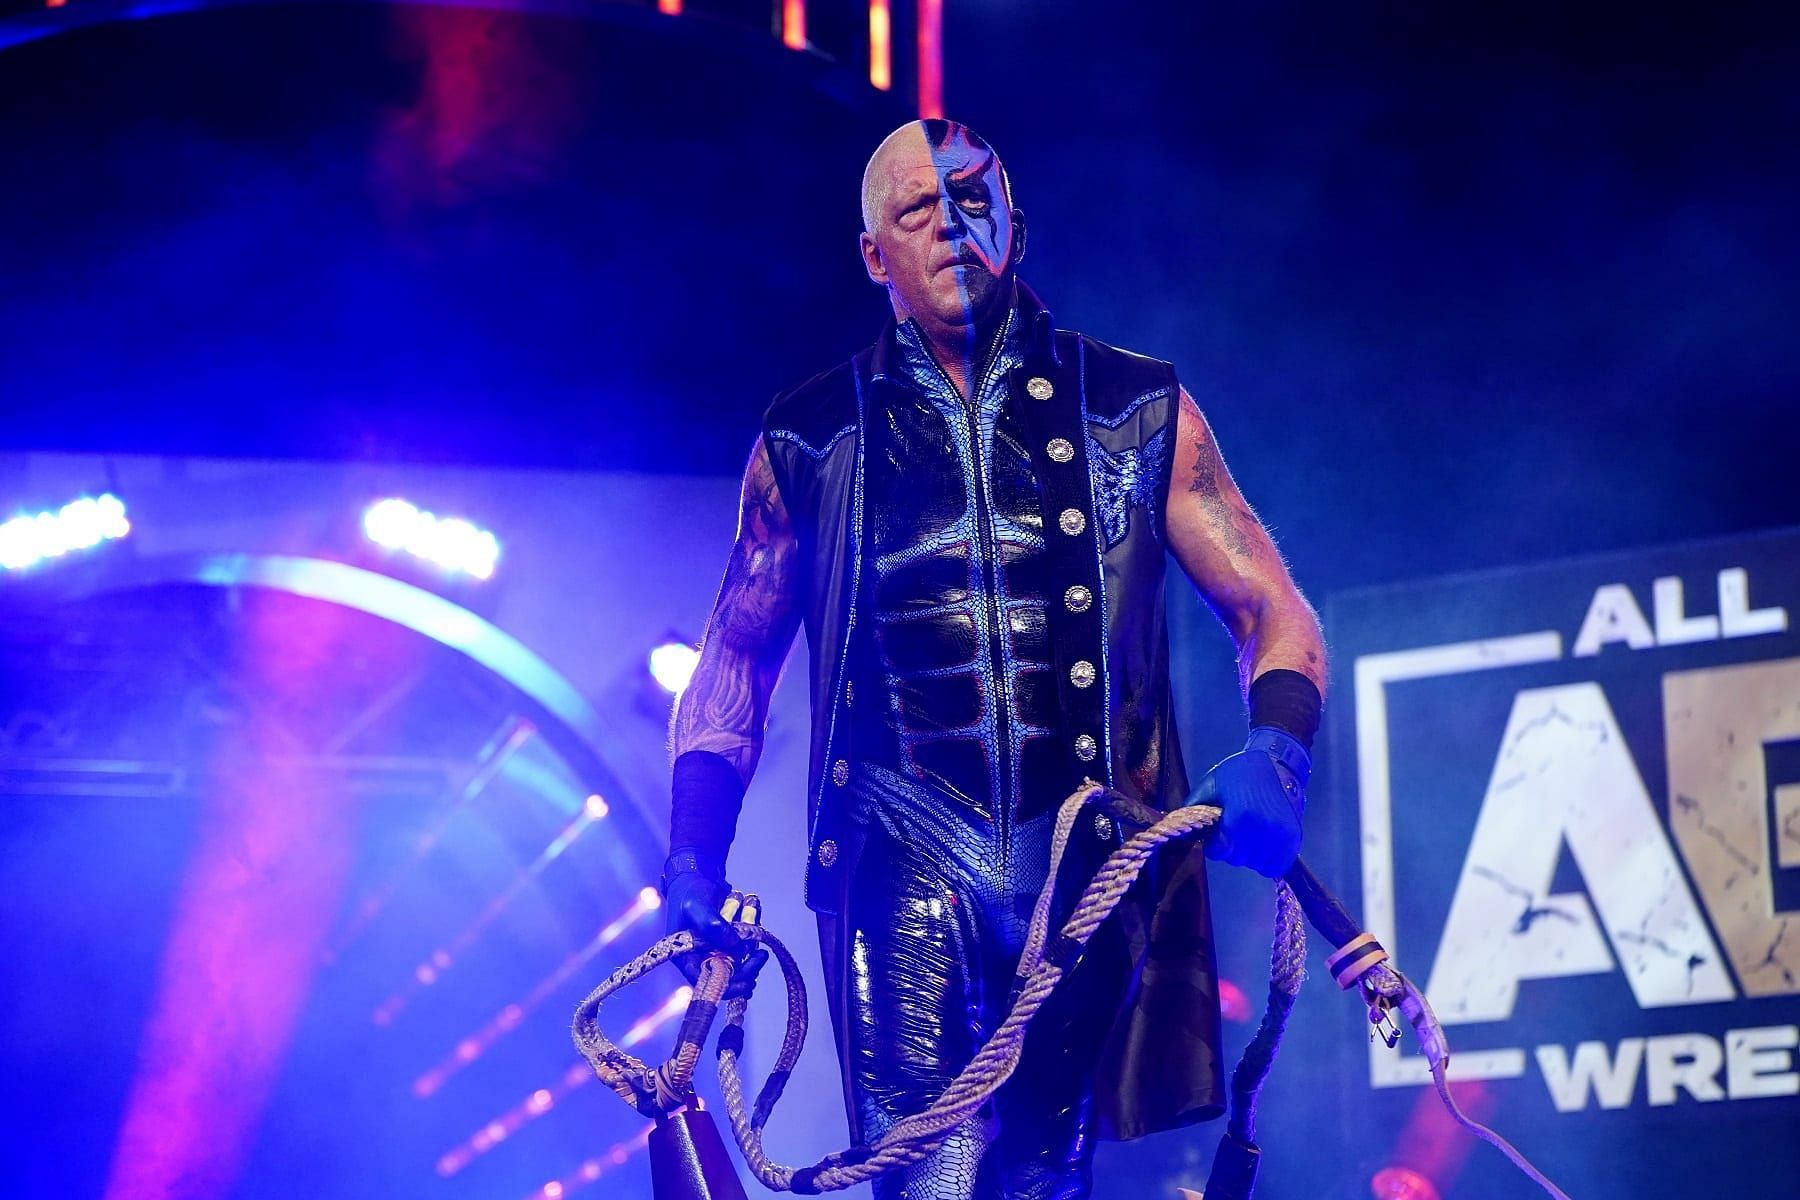 The WWE legend joined AEW back in 2019.